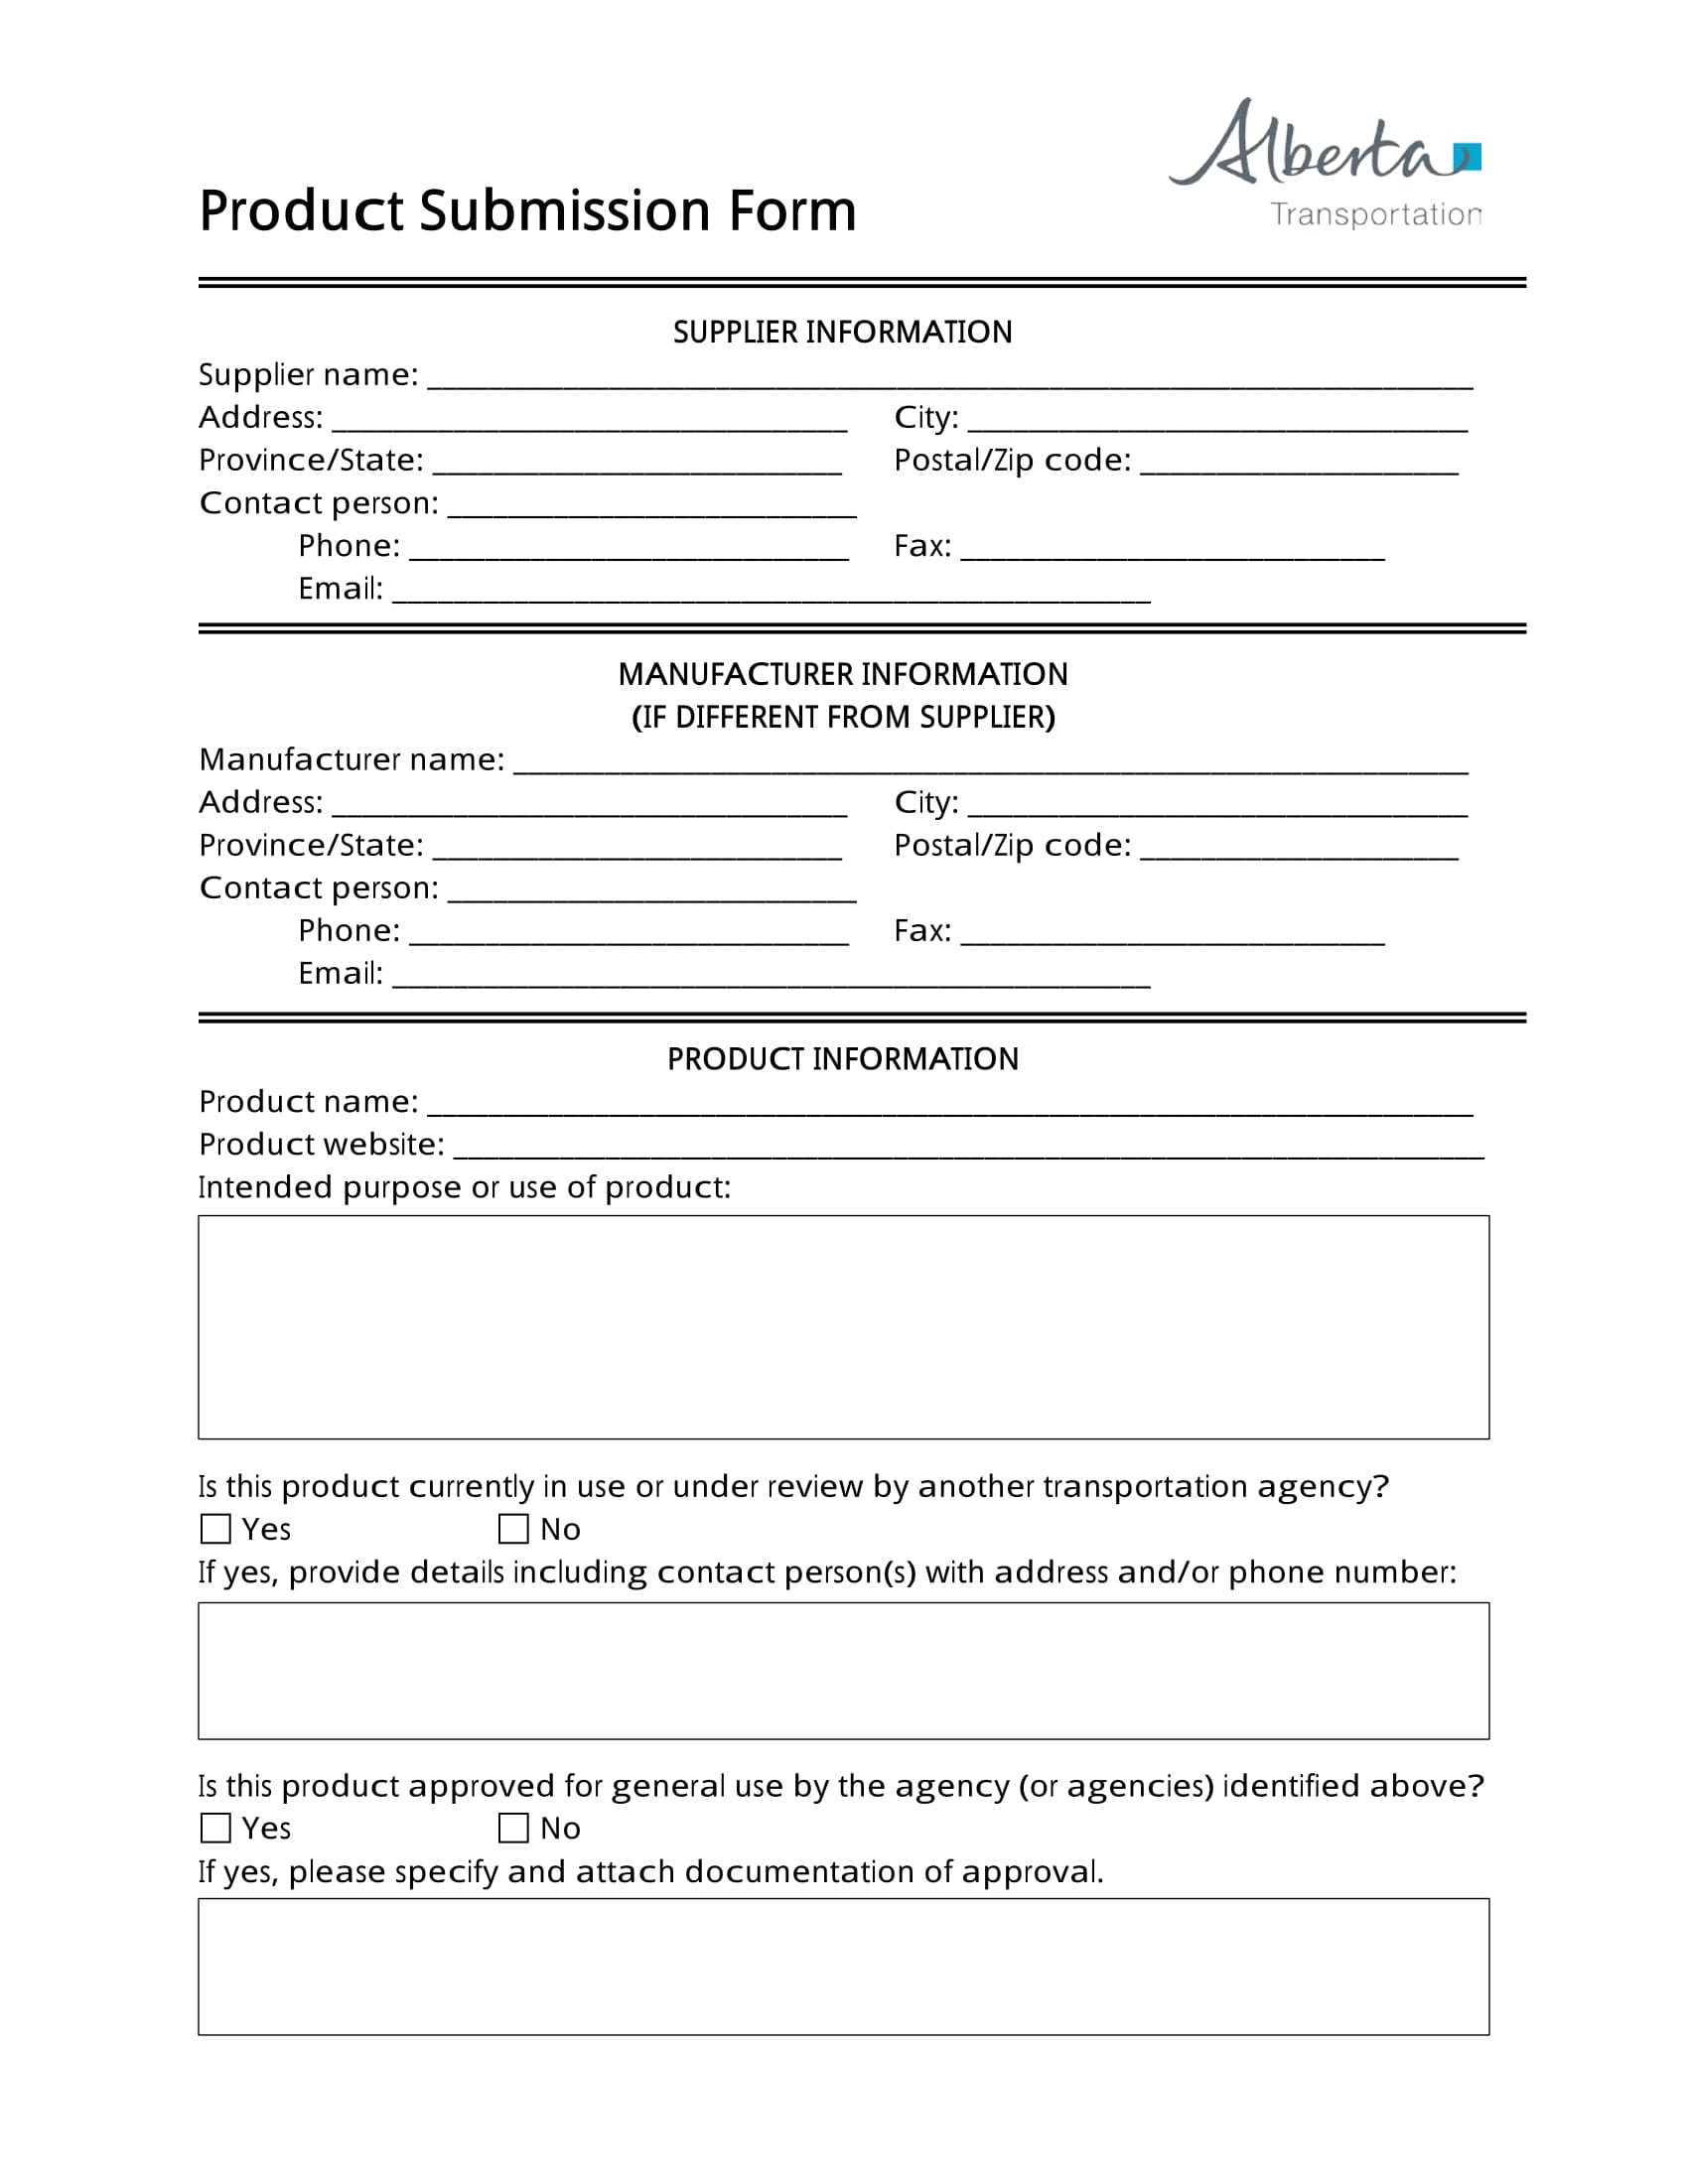 product submission information form 2